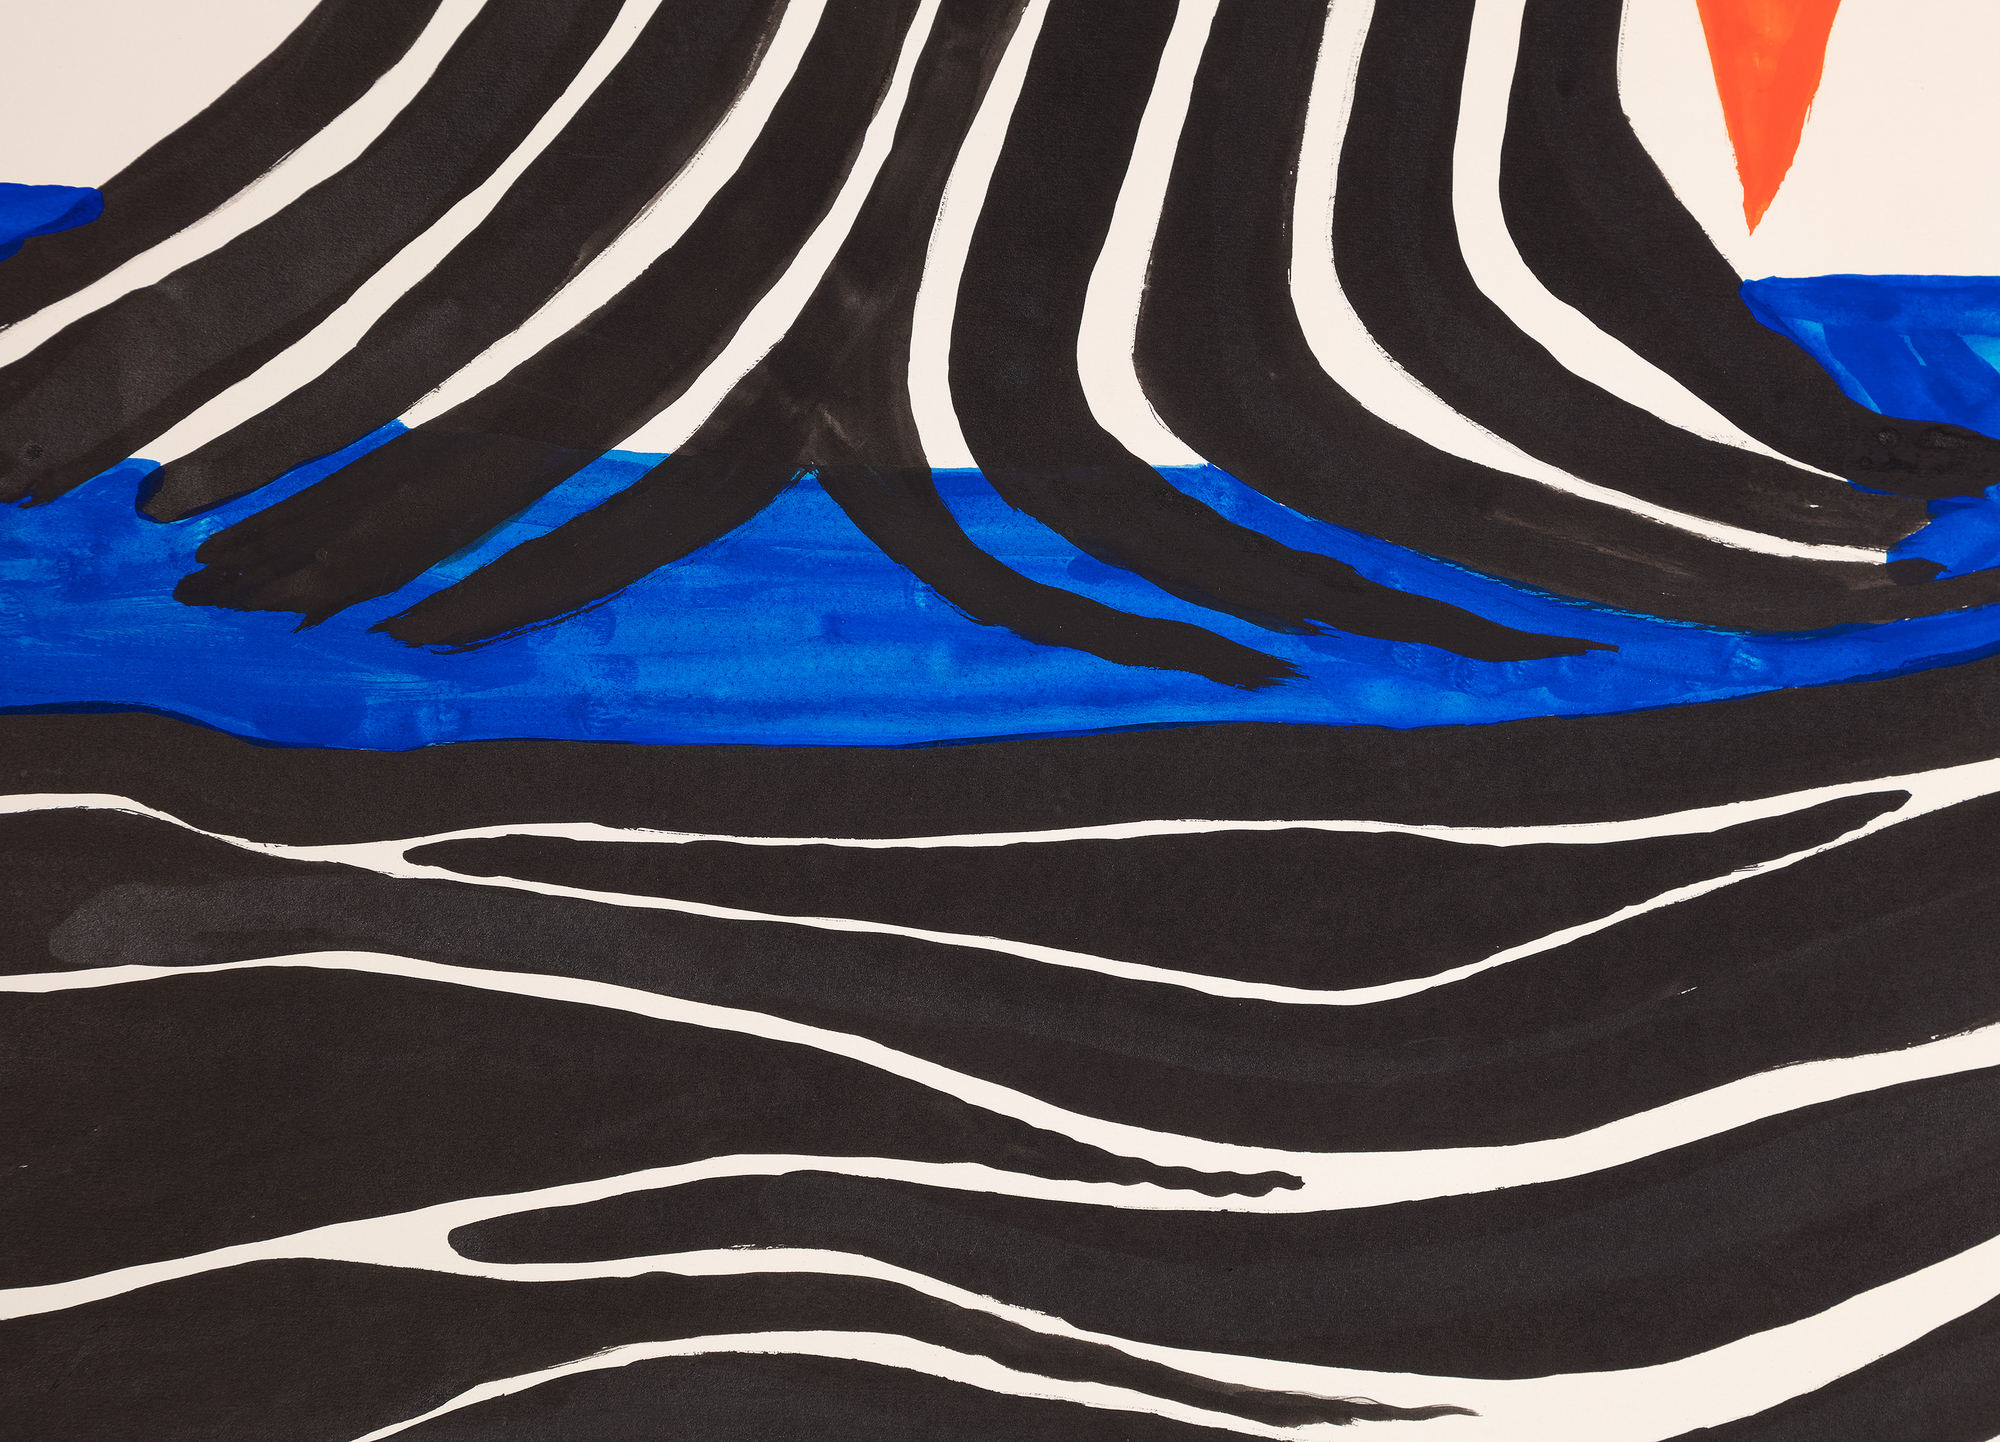 Zigzag, Sun, and Crags, painted in 1972, recalls the early morning hour of June 9, 1922 when the young seafaring adventurer Sandy (Alexander) Calder was awakened on the deck of the H. F. Alexander by the intense beams of tropical sunlight that burst across the bow. He stood, squinting against the glare, then turned his head to the west and felt a sudden rush of sensations that brought to him a cosmic resonance he had never felt before. <br><br>“It was early one morning on a calm sea, off Guatemala, when over my couch — a coil of rope — I saw the beginning of a fiery red sunrise on one side and the moon looking like a silver coin on the other. Of the whole trip this impressed me most of all; it left me with a lasting sensation of the solar system.” <br><br>Zignag, Sun, and Crags is not a simple memento of that experience. It is an exhilarating work that celebrates Calder’s inimitable way of imparting the wonder of the natural world by amplifying our experience of it. If, as he might wish, it brings a sense of interconnectedness and belonging as it did to him along the coast of Guatemala as a young Merchant Marine, so much the better.